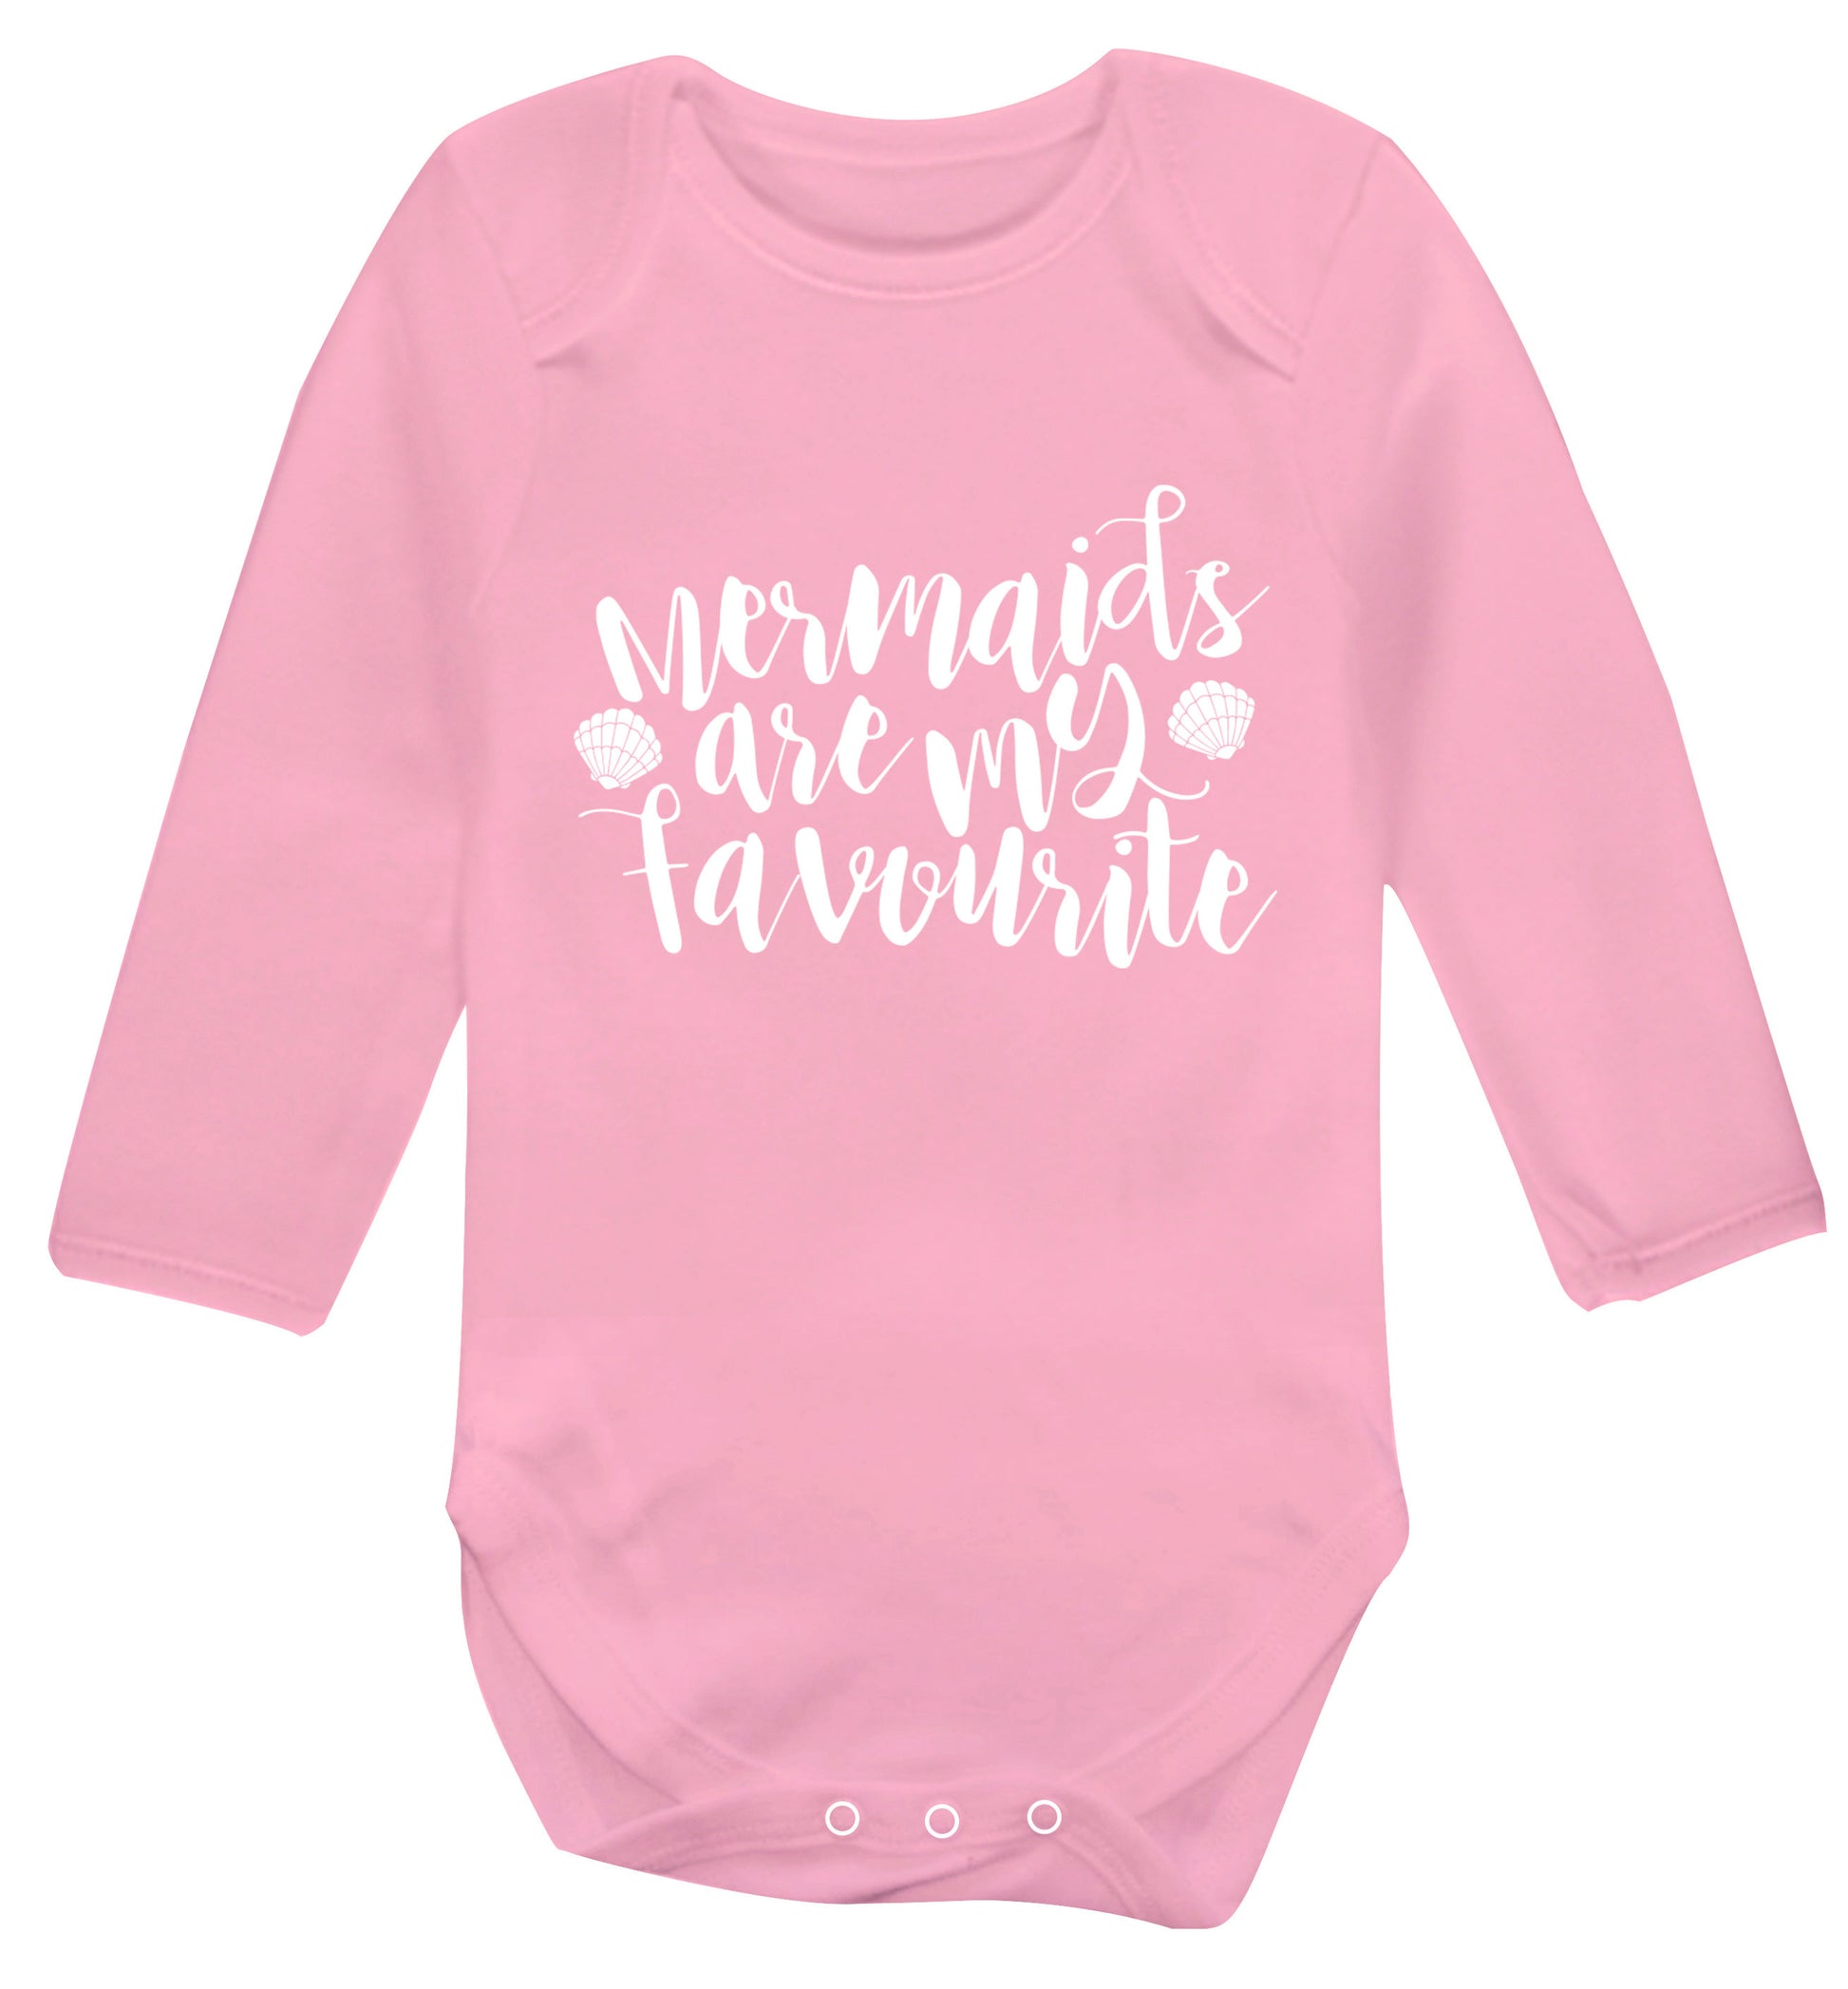 Mermaids are my favourite Baby Vest long sleeved pale pink 6-12 months